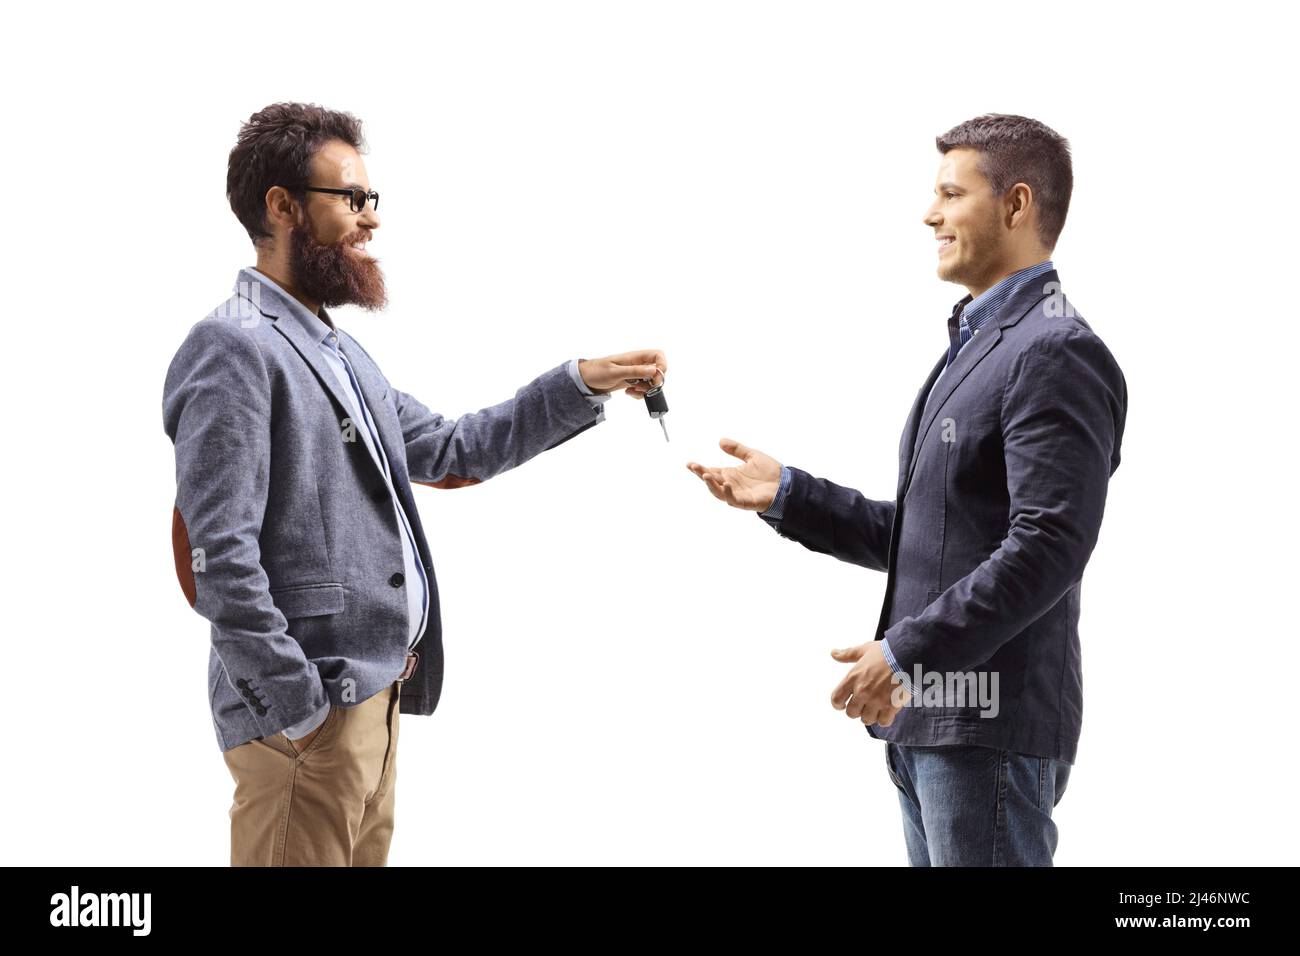 Bearded man giving car keys to a young man isolated on white background Stock Photo